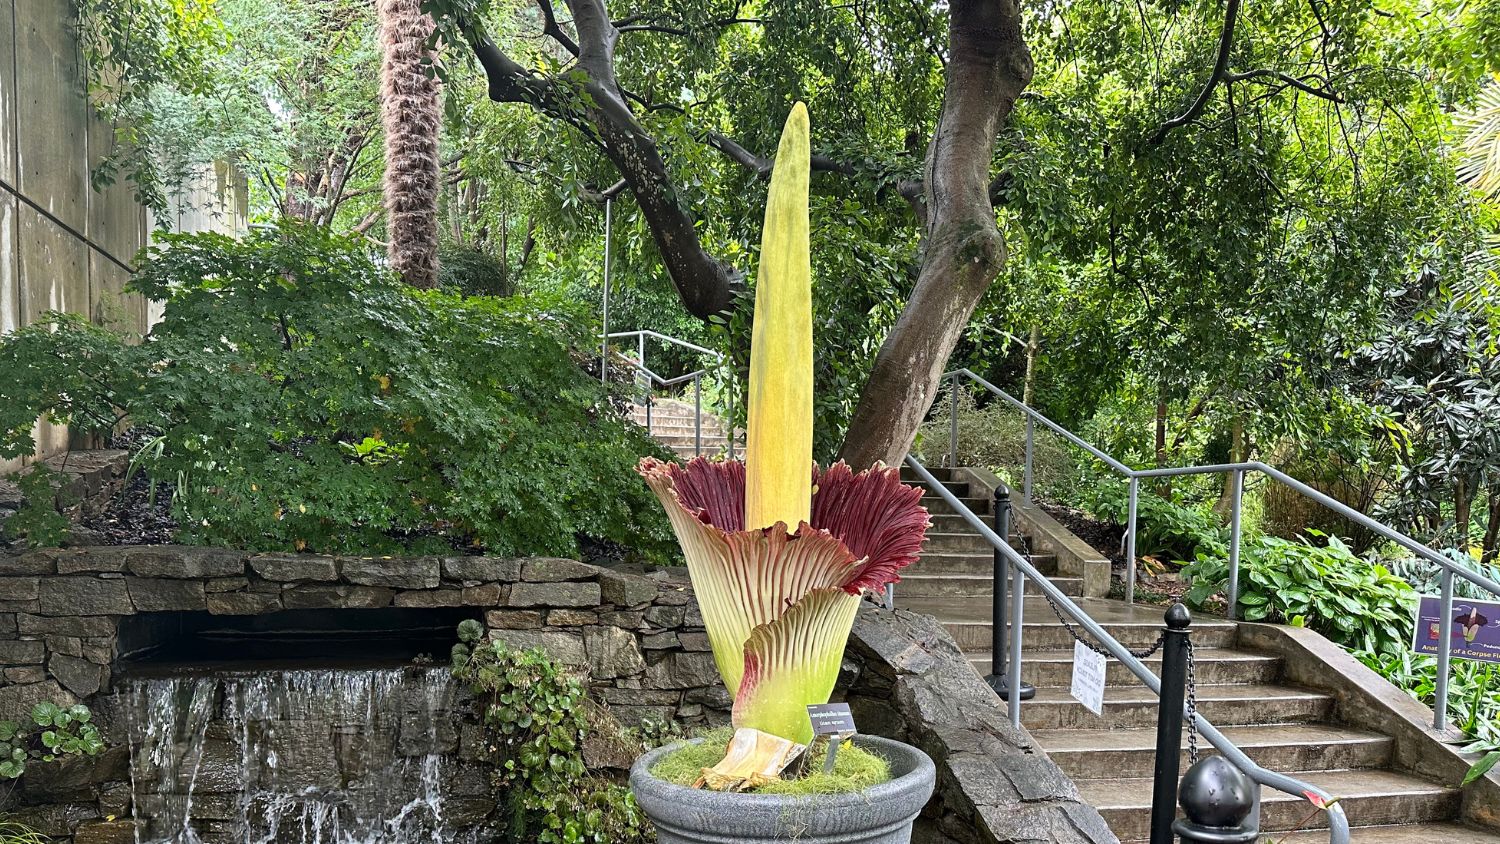 Wolfgang the corpse flower blooming at JCRA